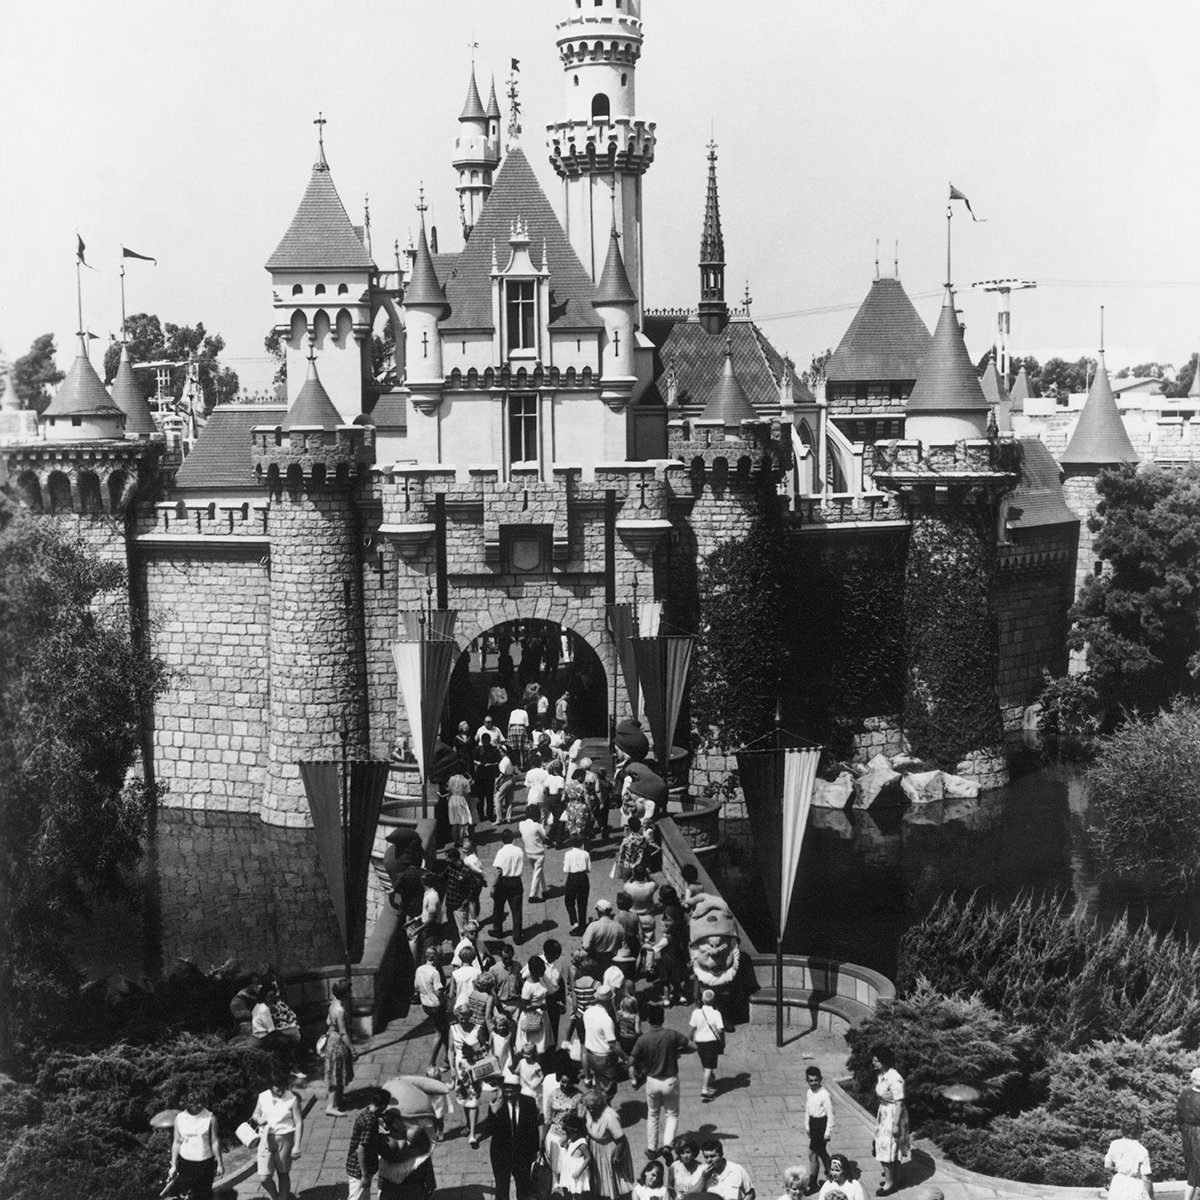 UNITED STATES - JANUARY 01: 1955: Disneyland Welcome : What has become one of the best known landmarks of the wondrous world of Disneyland is this gateway to Sleeping Beauty's Castle. Through its portcullised arch lies Fantasyland, one of the five divisions of Disneyland. Greeting visitors on the castle drawbridge are Snow White and the seven Dwarfs, just a few of the famous Disney characters who inhabit this happy land. Some say that Las Vegas, an hour away by air, is a Disneyland for adults. (Photo by Keystone-France/Gamma-Keystone via Getty Images)